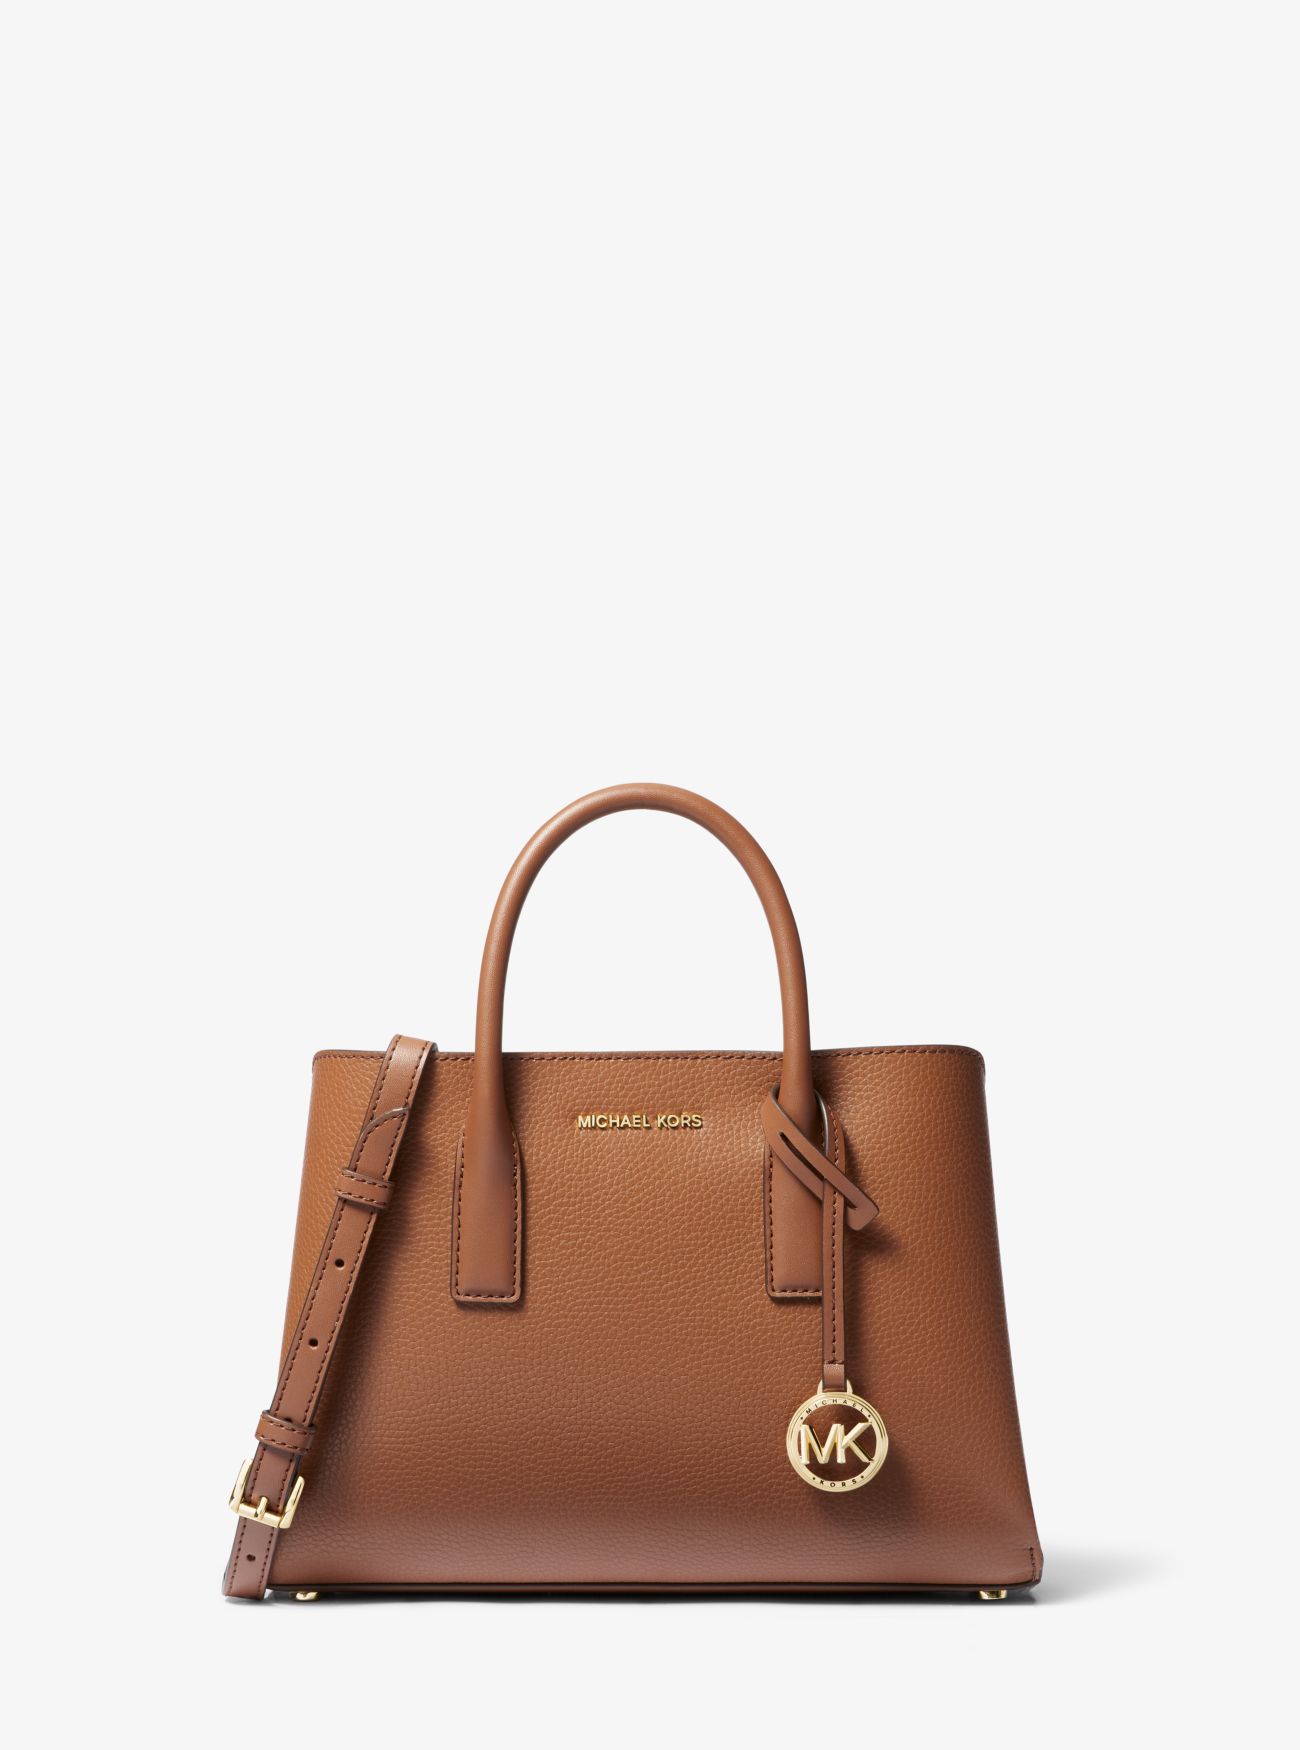 MICHAEL KORS RUTHIE SMALL PEBBLED LEATHER SATCHEL ΤΣΑΝΤΑ